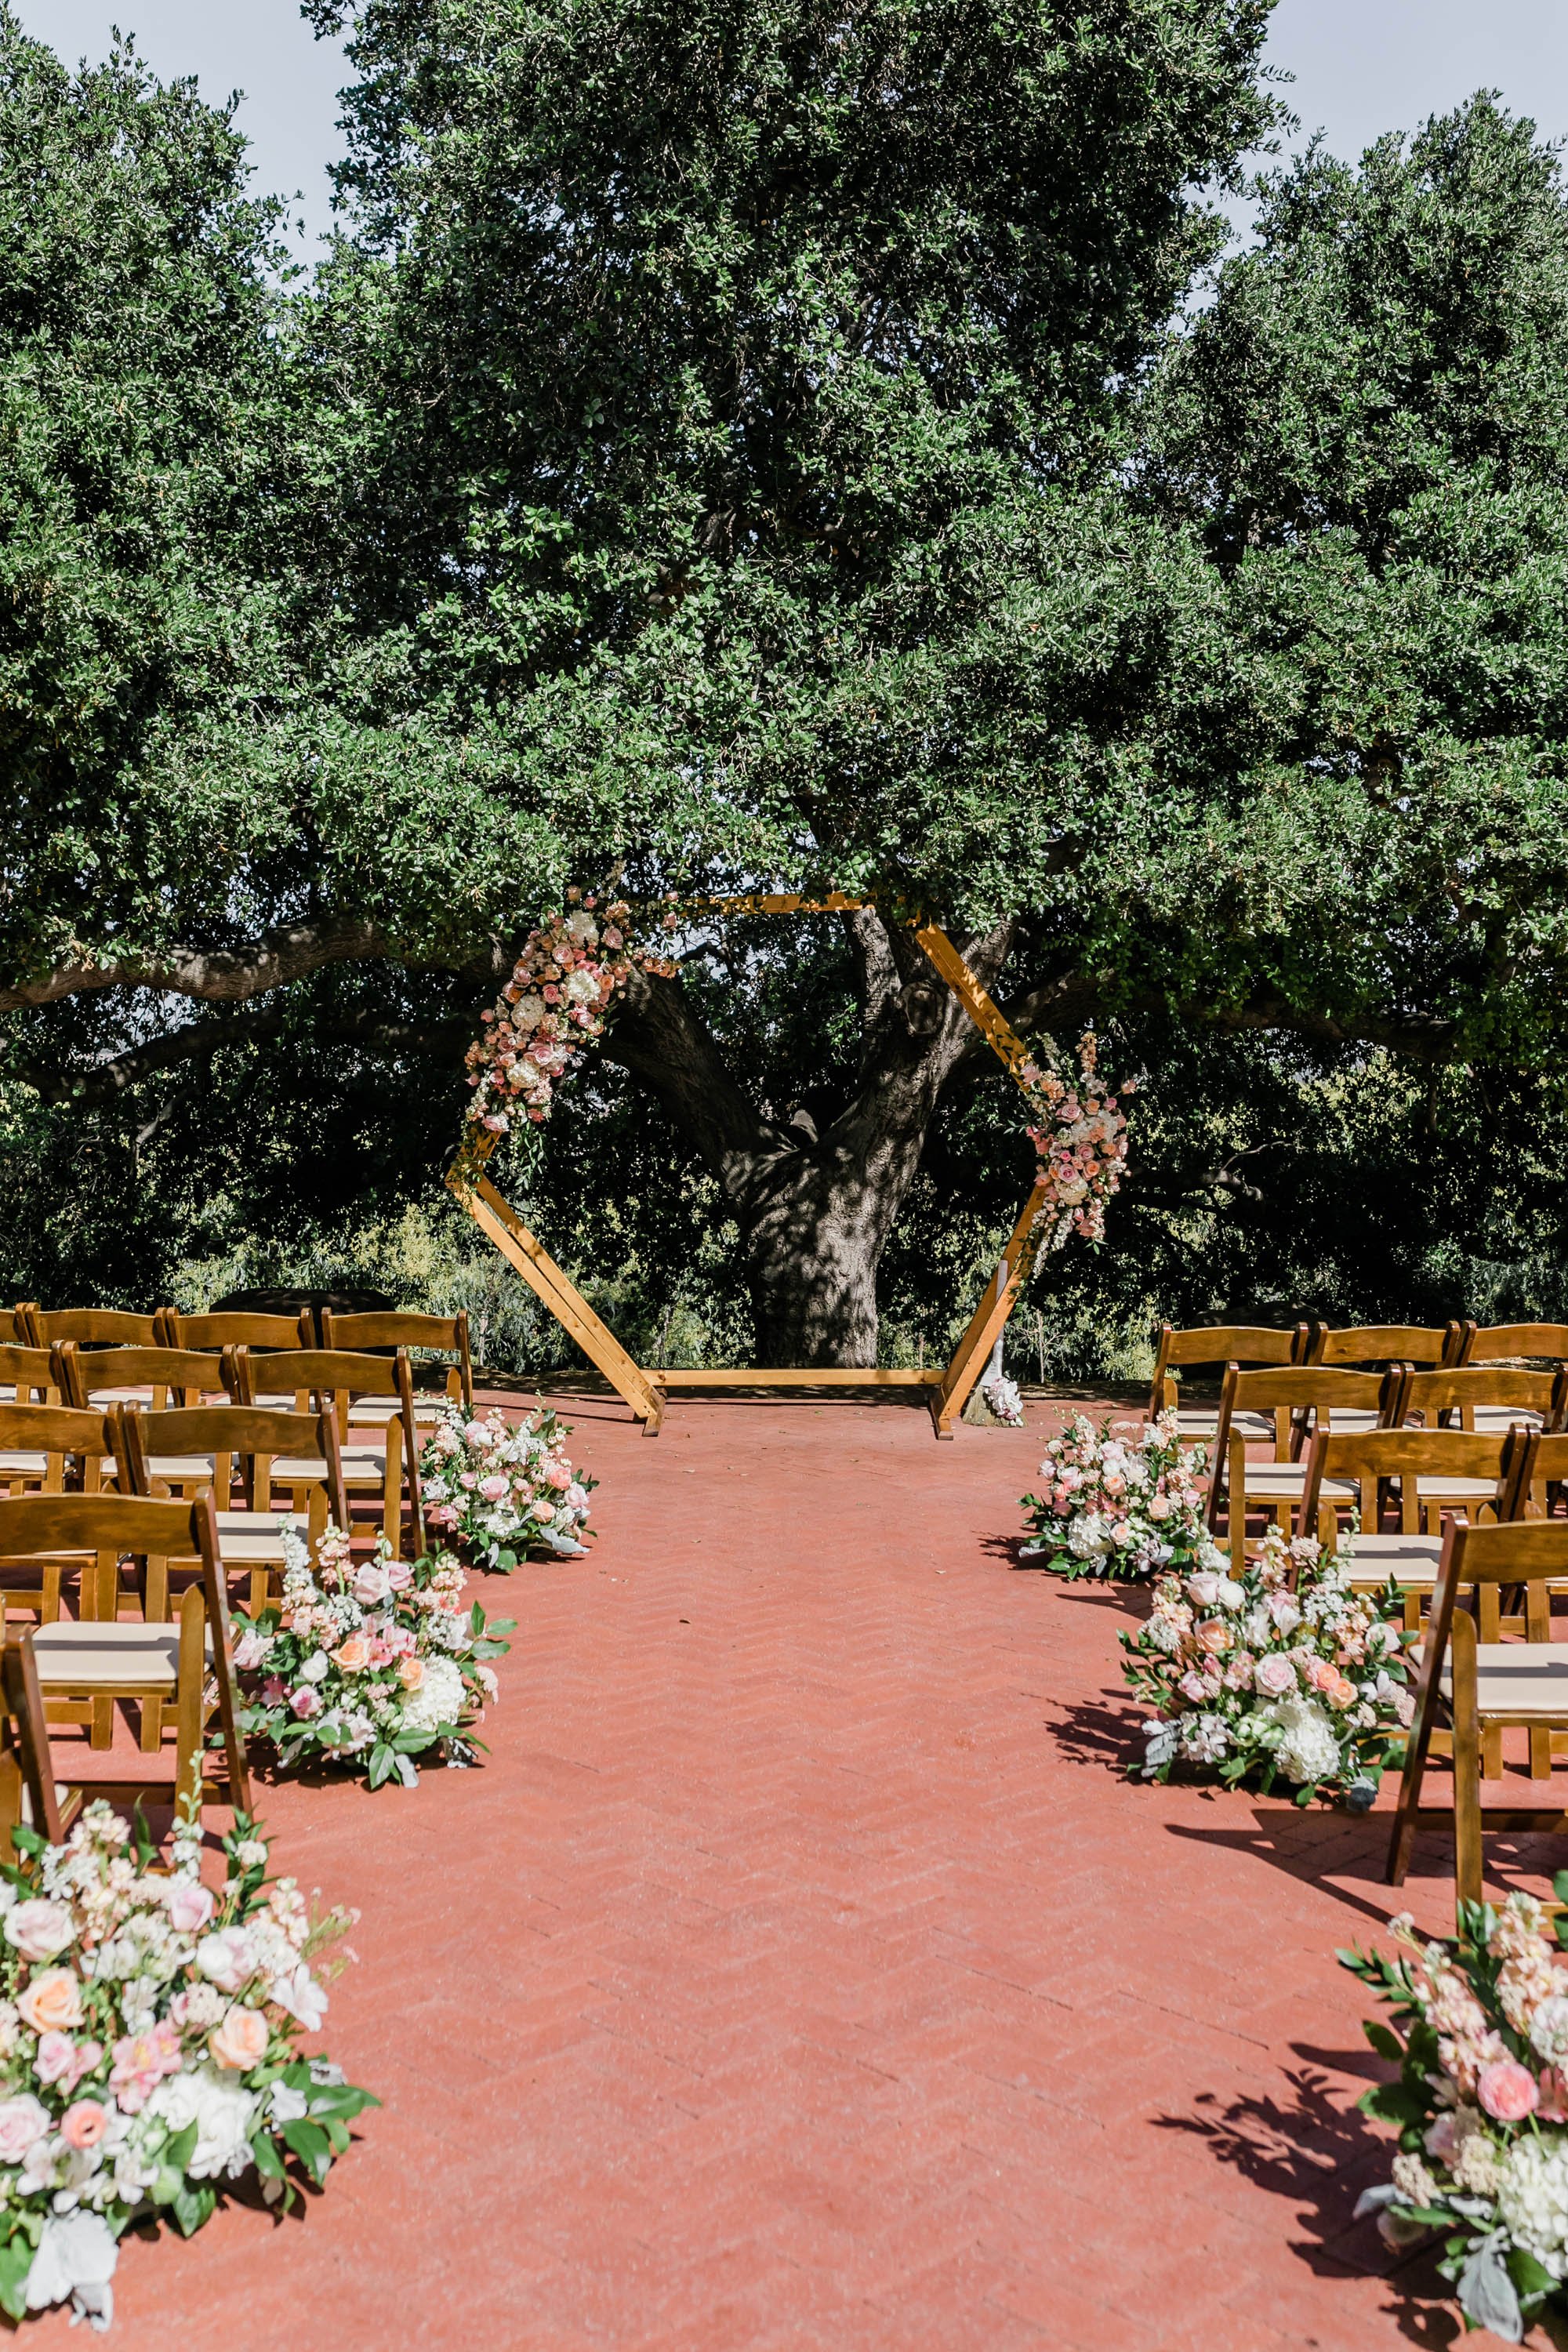 Outdoor ceremony space under tree at Spanish style ranch house at Quail Ranch events wedding venue in Simi Valley